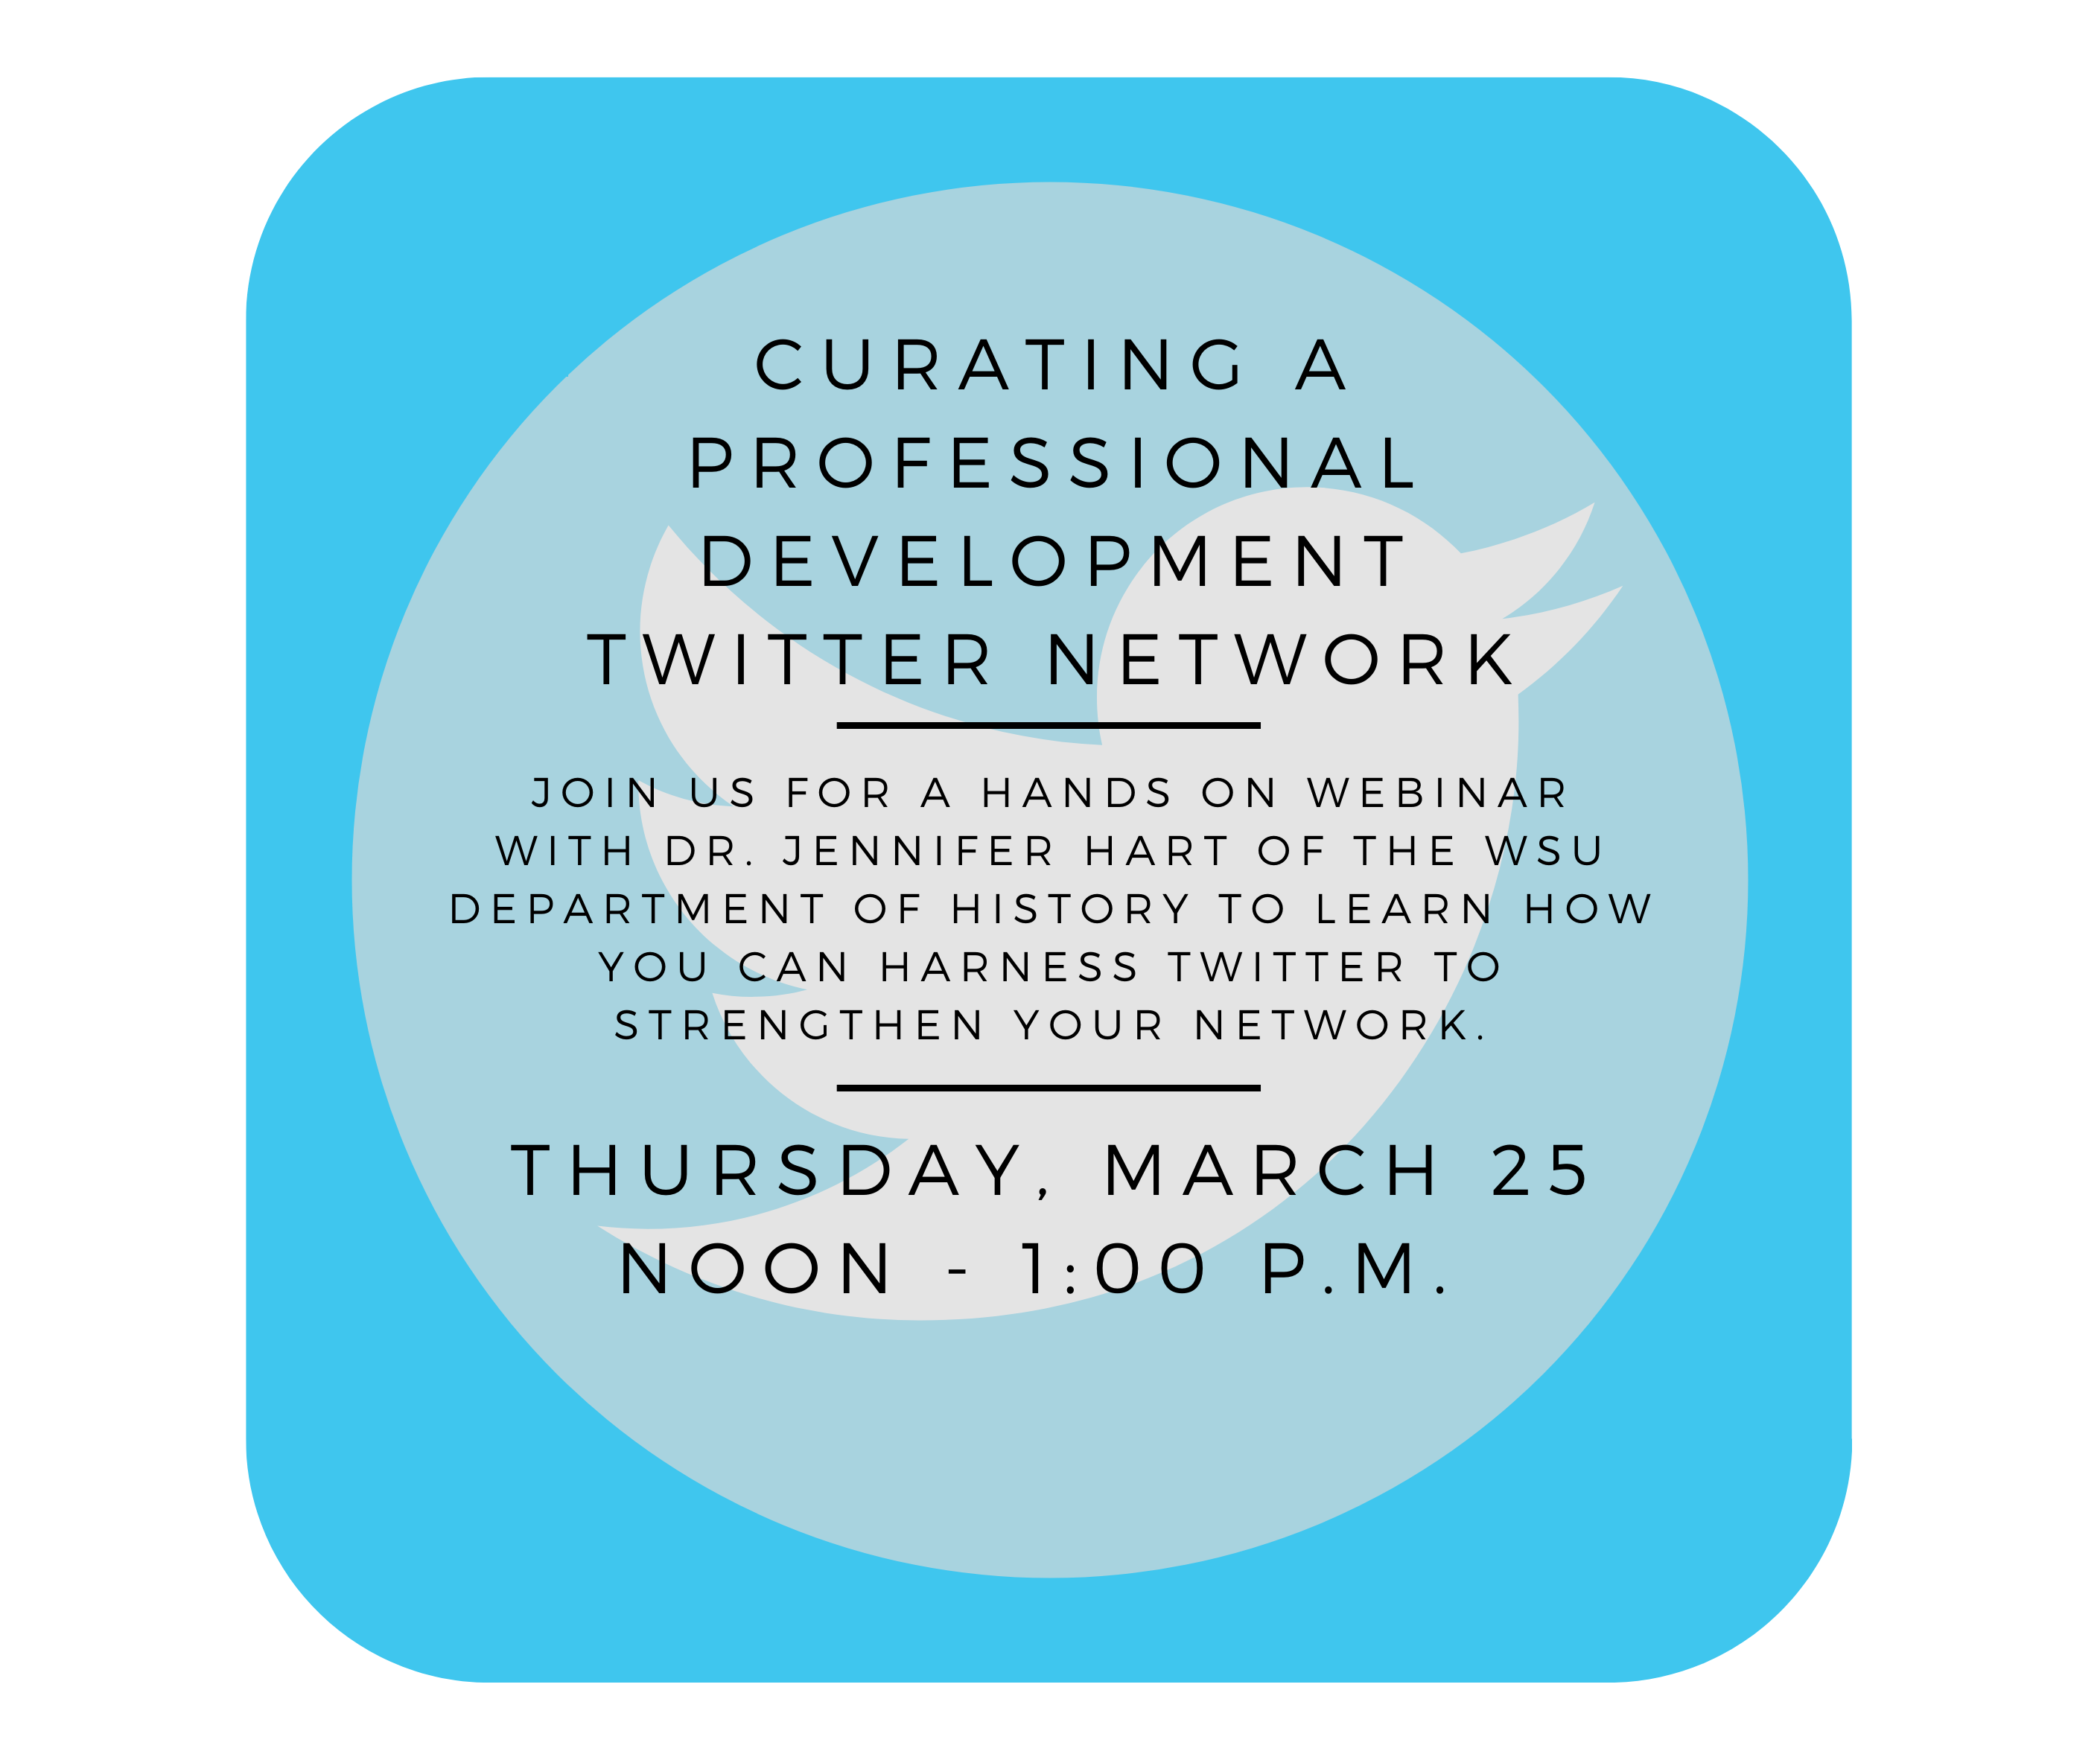 Curating a Professional Development Twitter Network